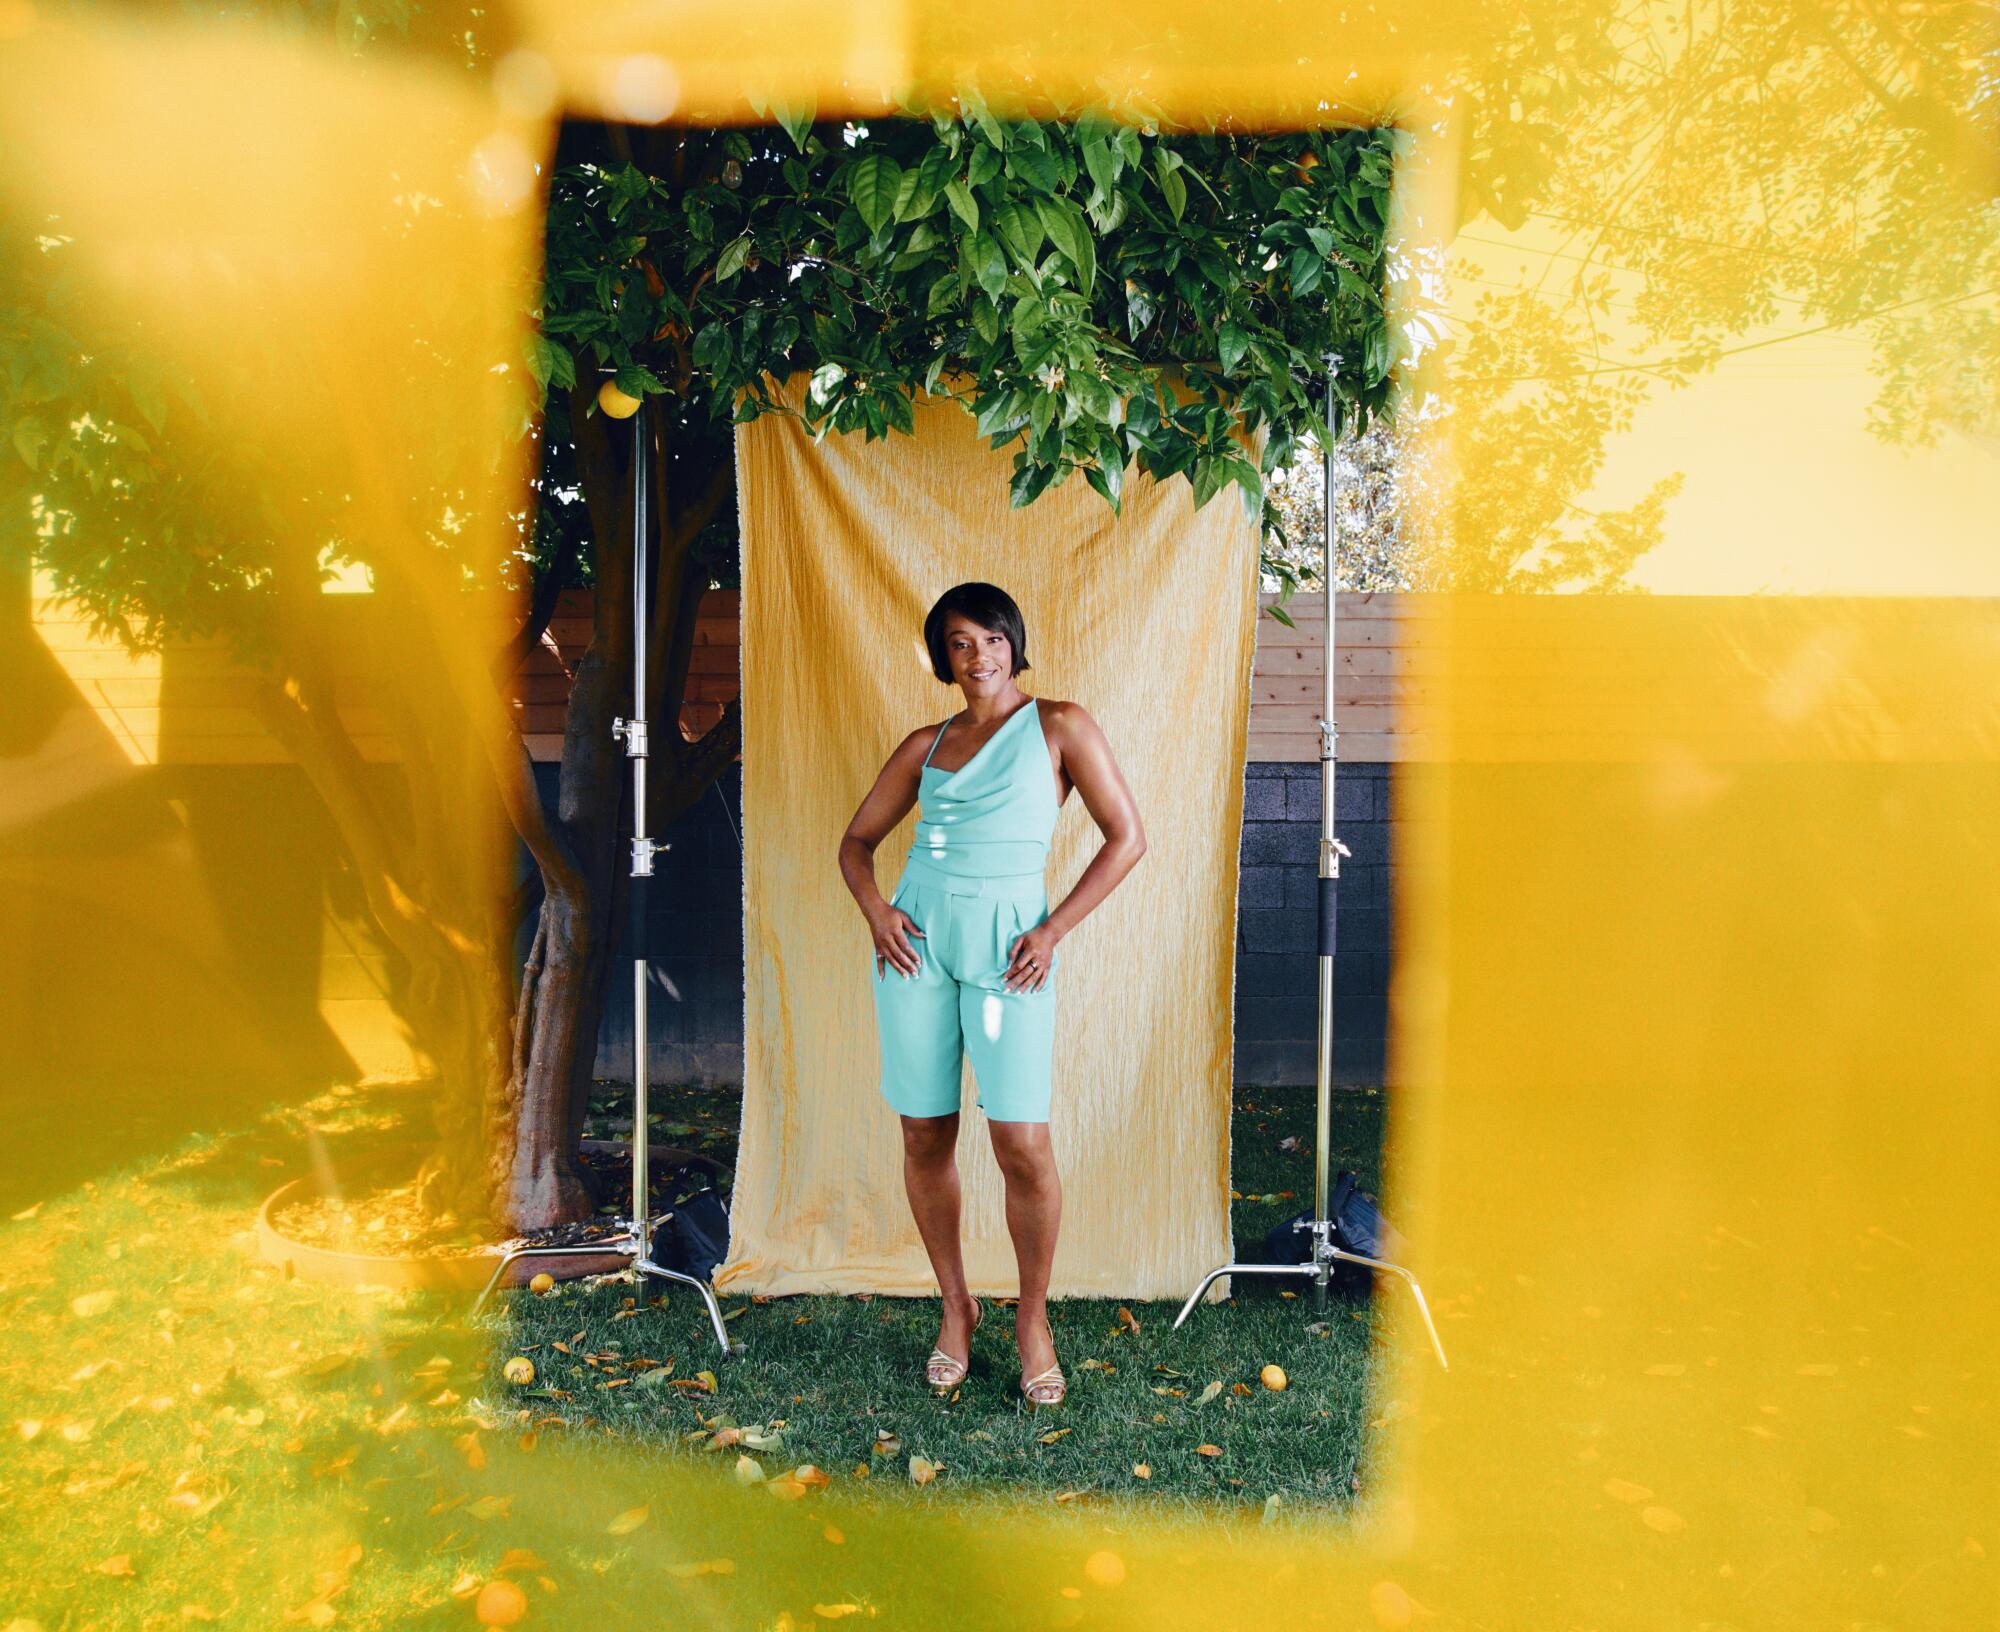 Tiffany Haddish in a mint green romper standing in front of a yellow backdrop under a tree